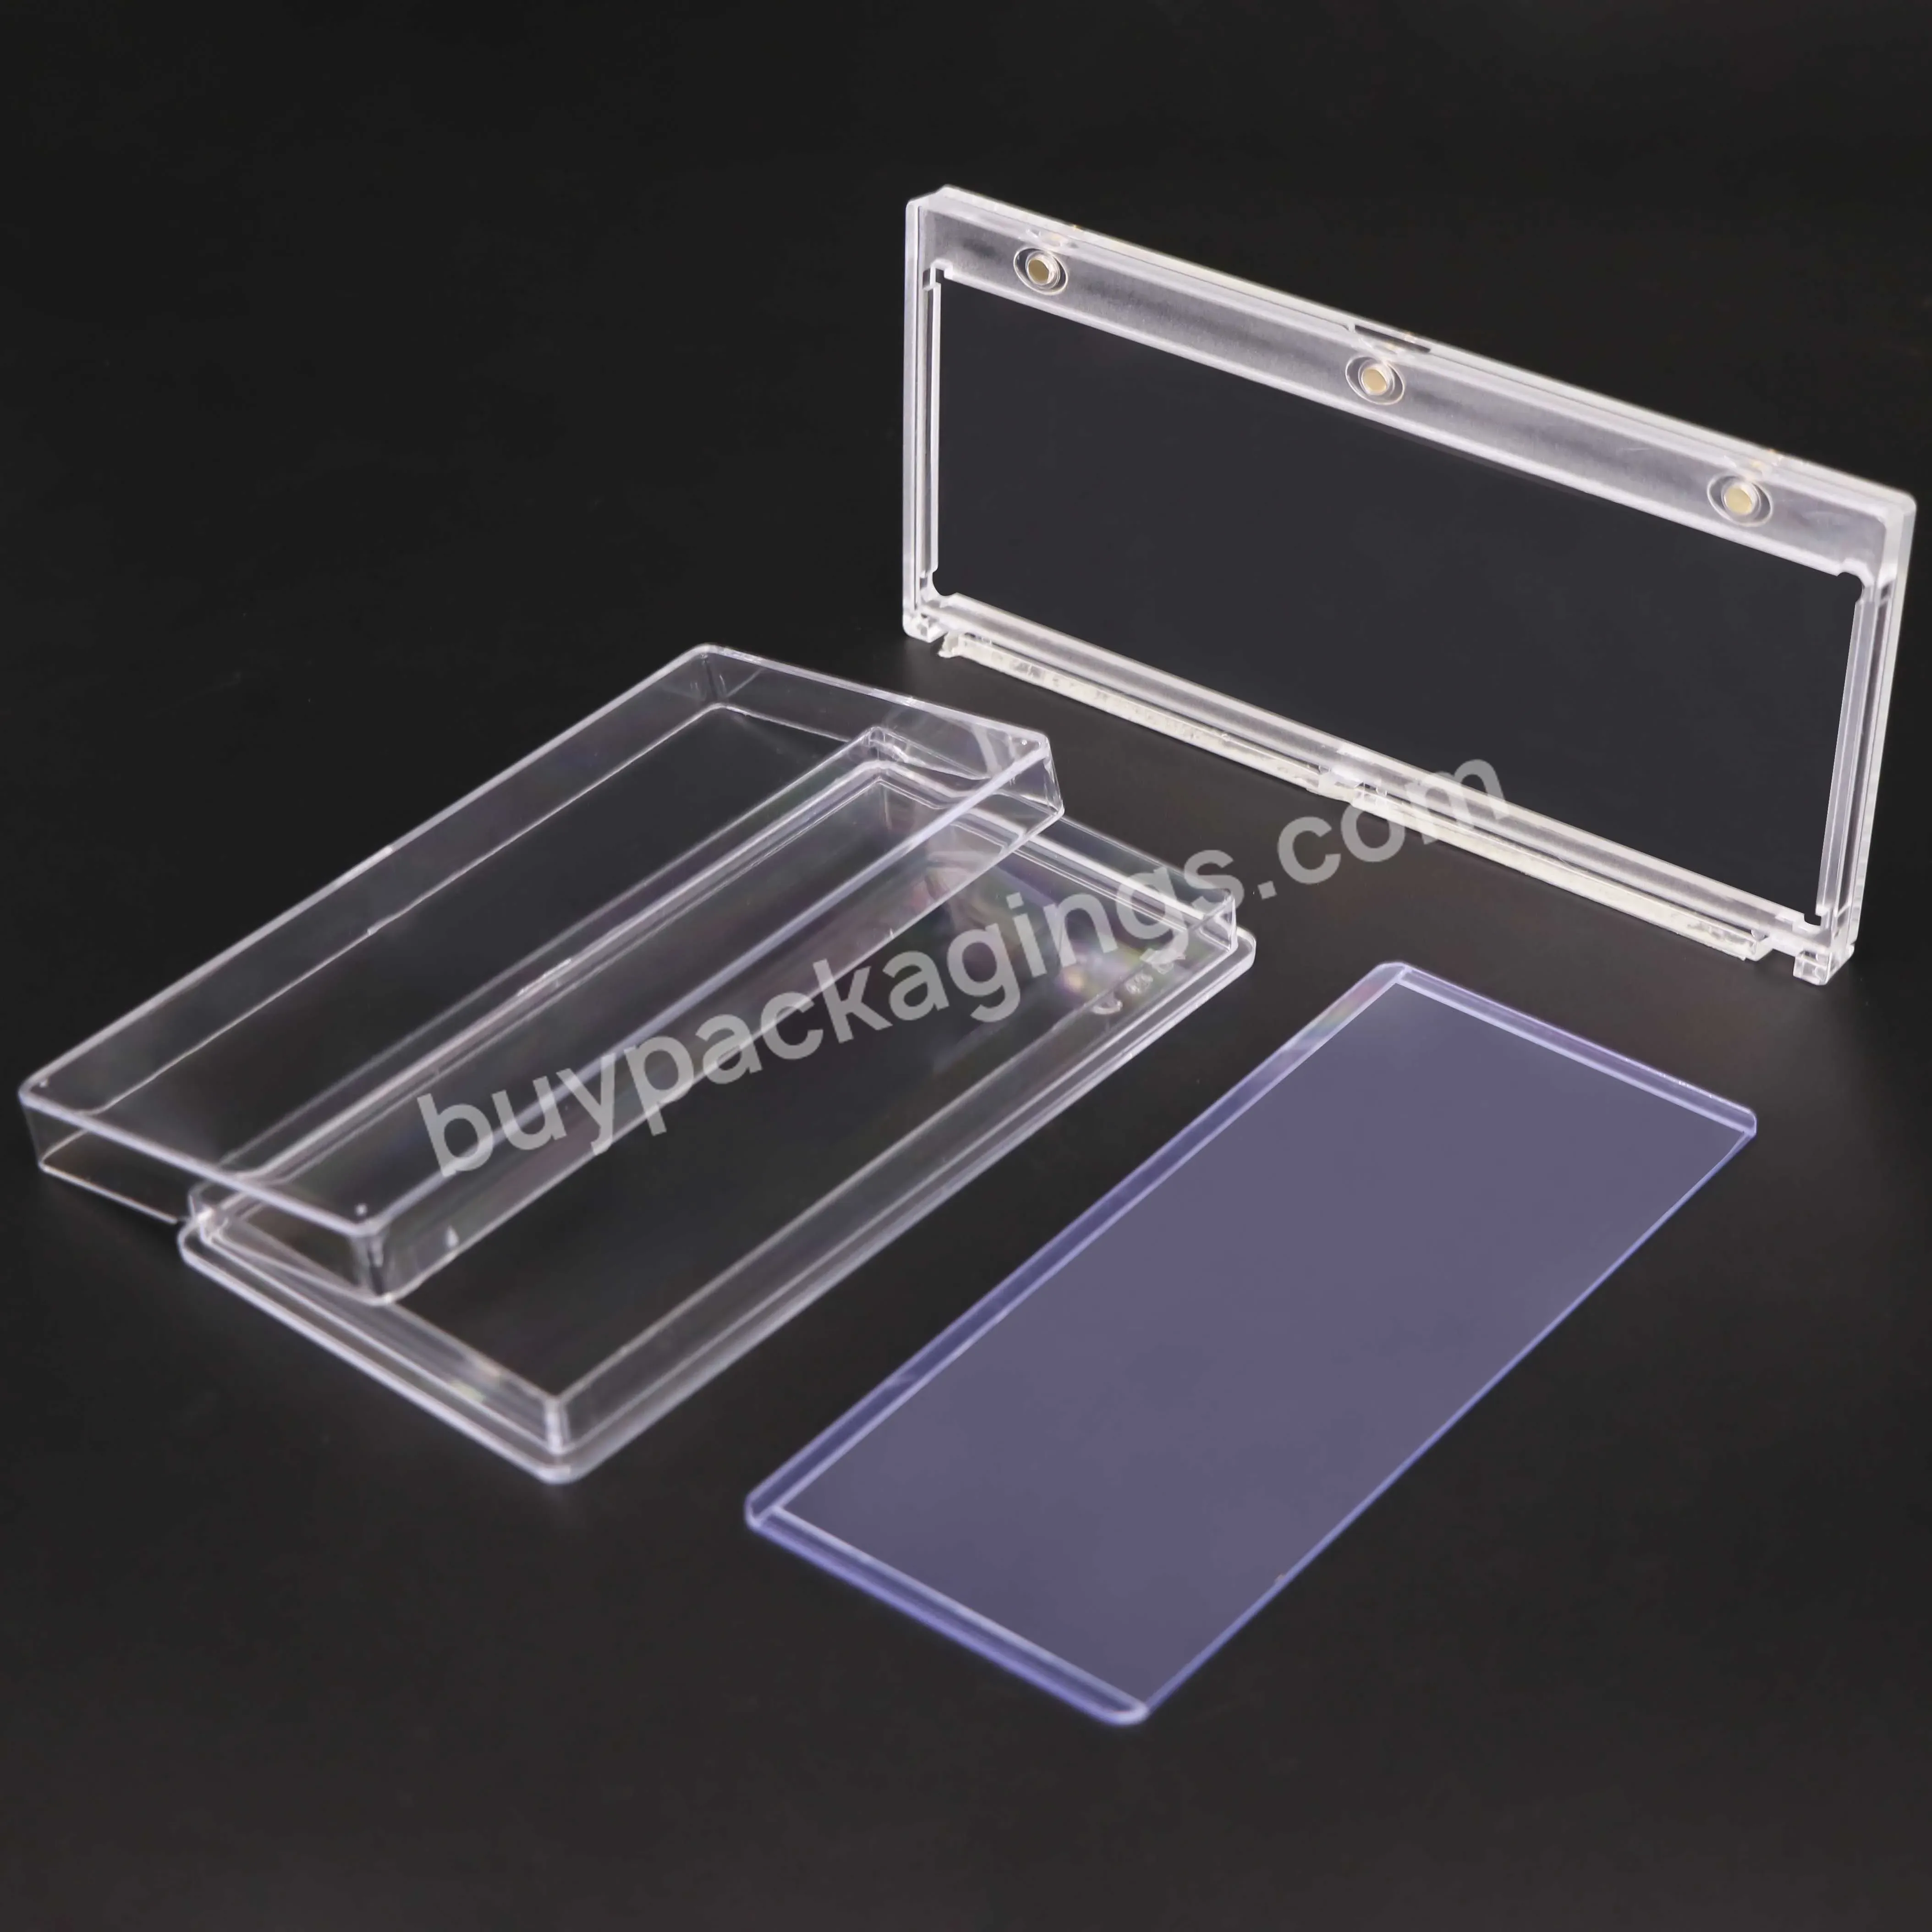 Different Size Box Support Customization Commemorative Banknotes Display Case Custom Card Holder Plastic Bank Notes - Buy Commemorative Banknotes Display Case,Custom Card Holder,Plastic Bank Notes Case.